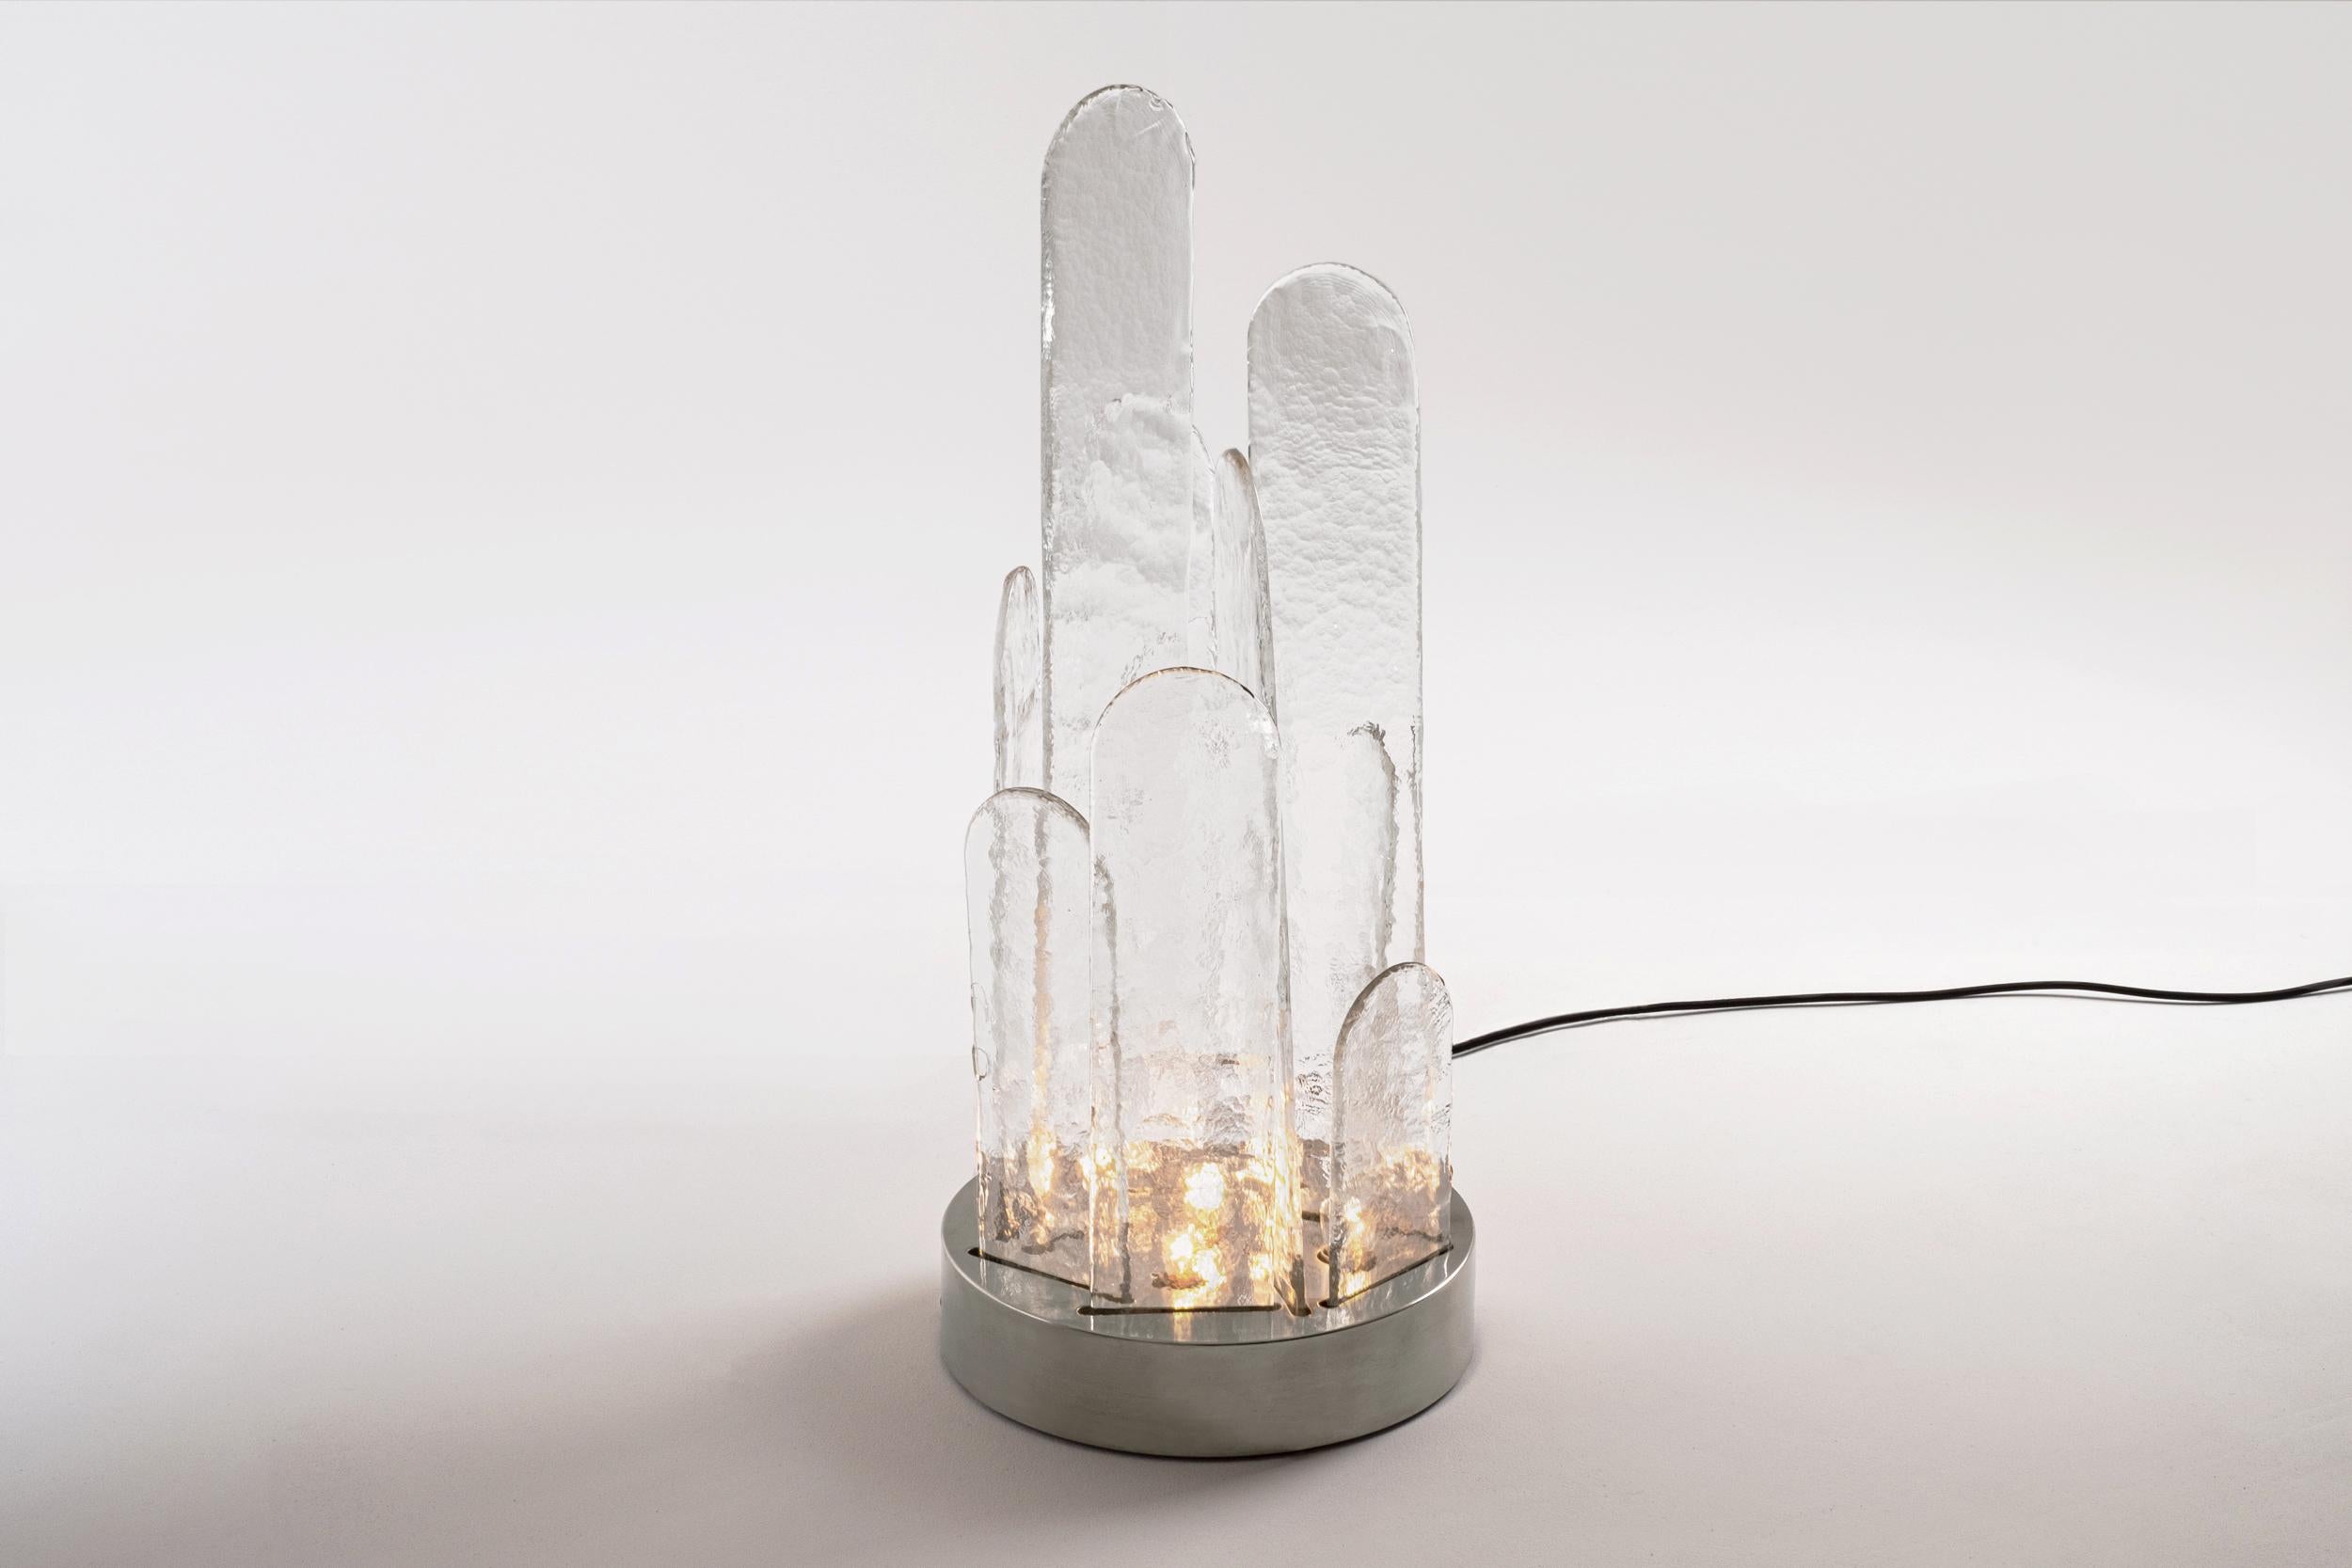 Spectaculair table lamp by Luigi Massoni for ITER Elettronica, Italy 1970s. Large and heavy pieces of clear Murano glass in different sizes and a nickel plated base. The glass pieces show a beautiful characteristic structure imprint which catches